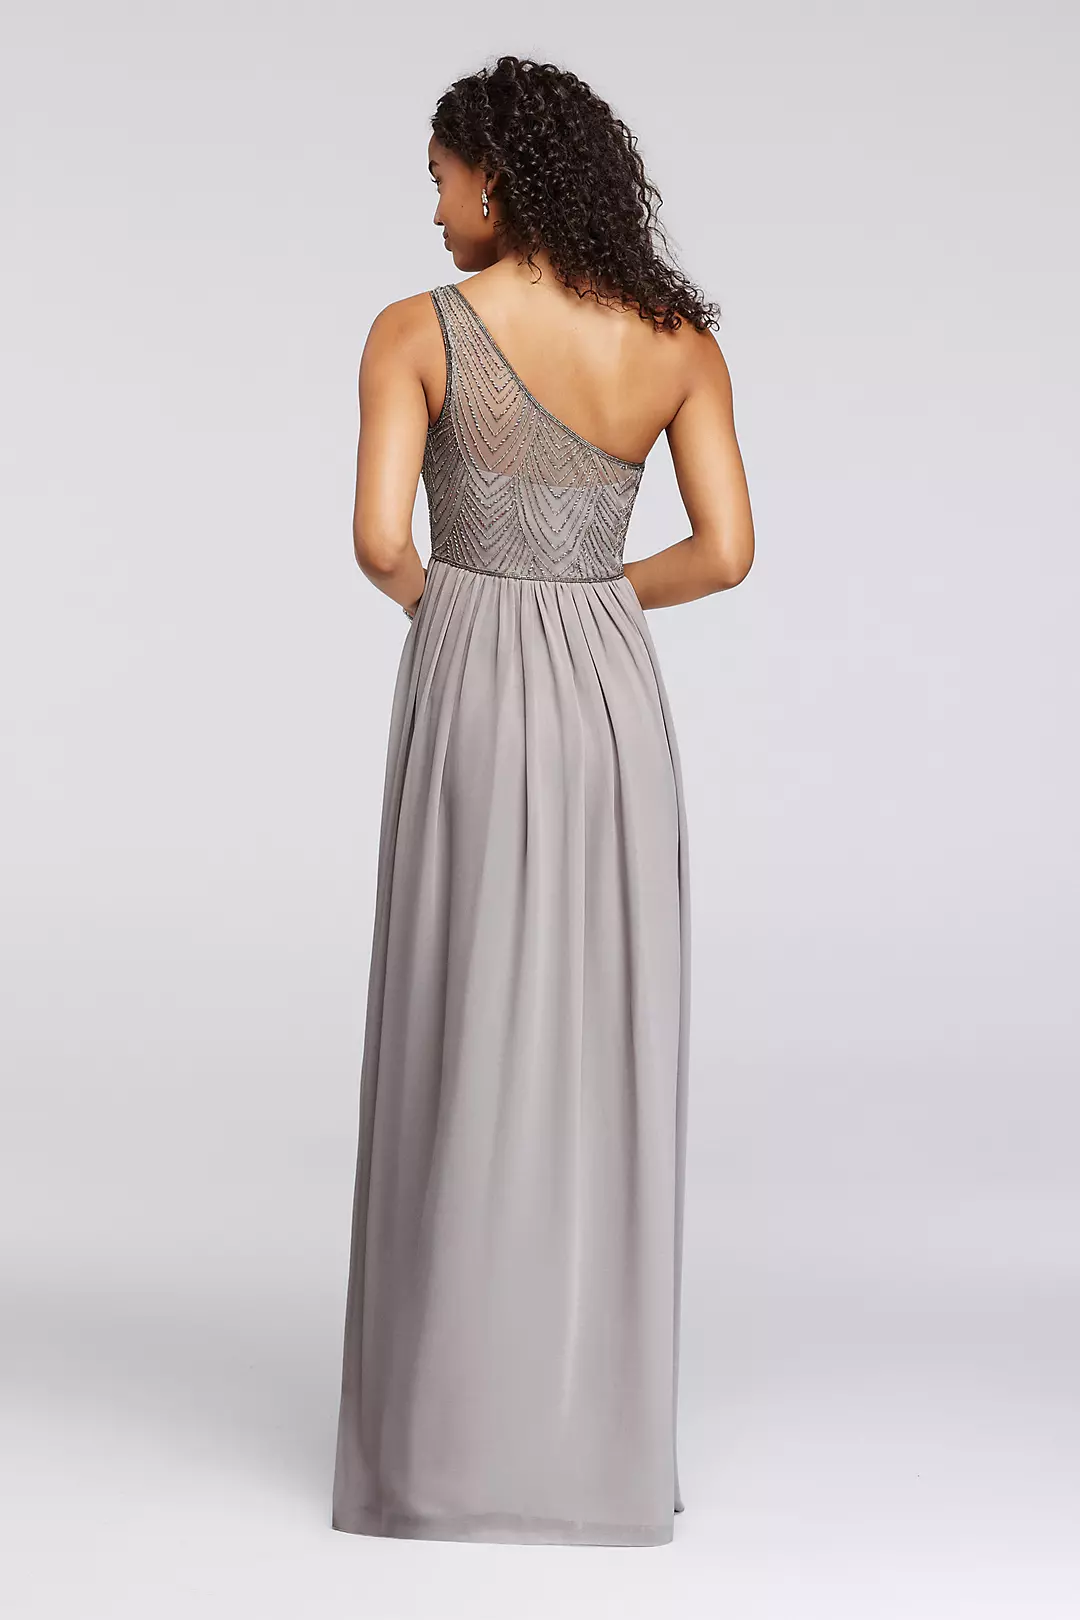 One-Shoulder Long Dress with Beaded Bodice  Image 2